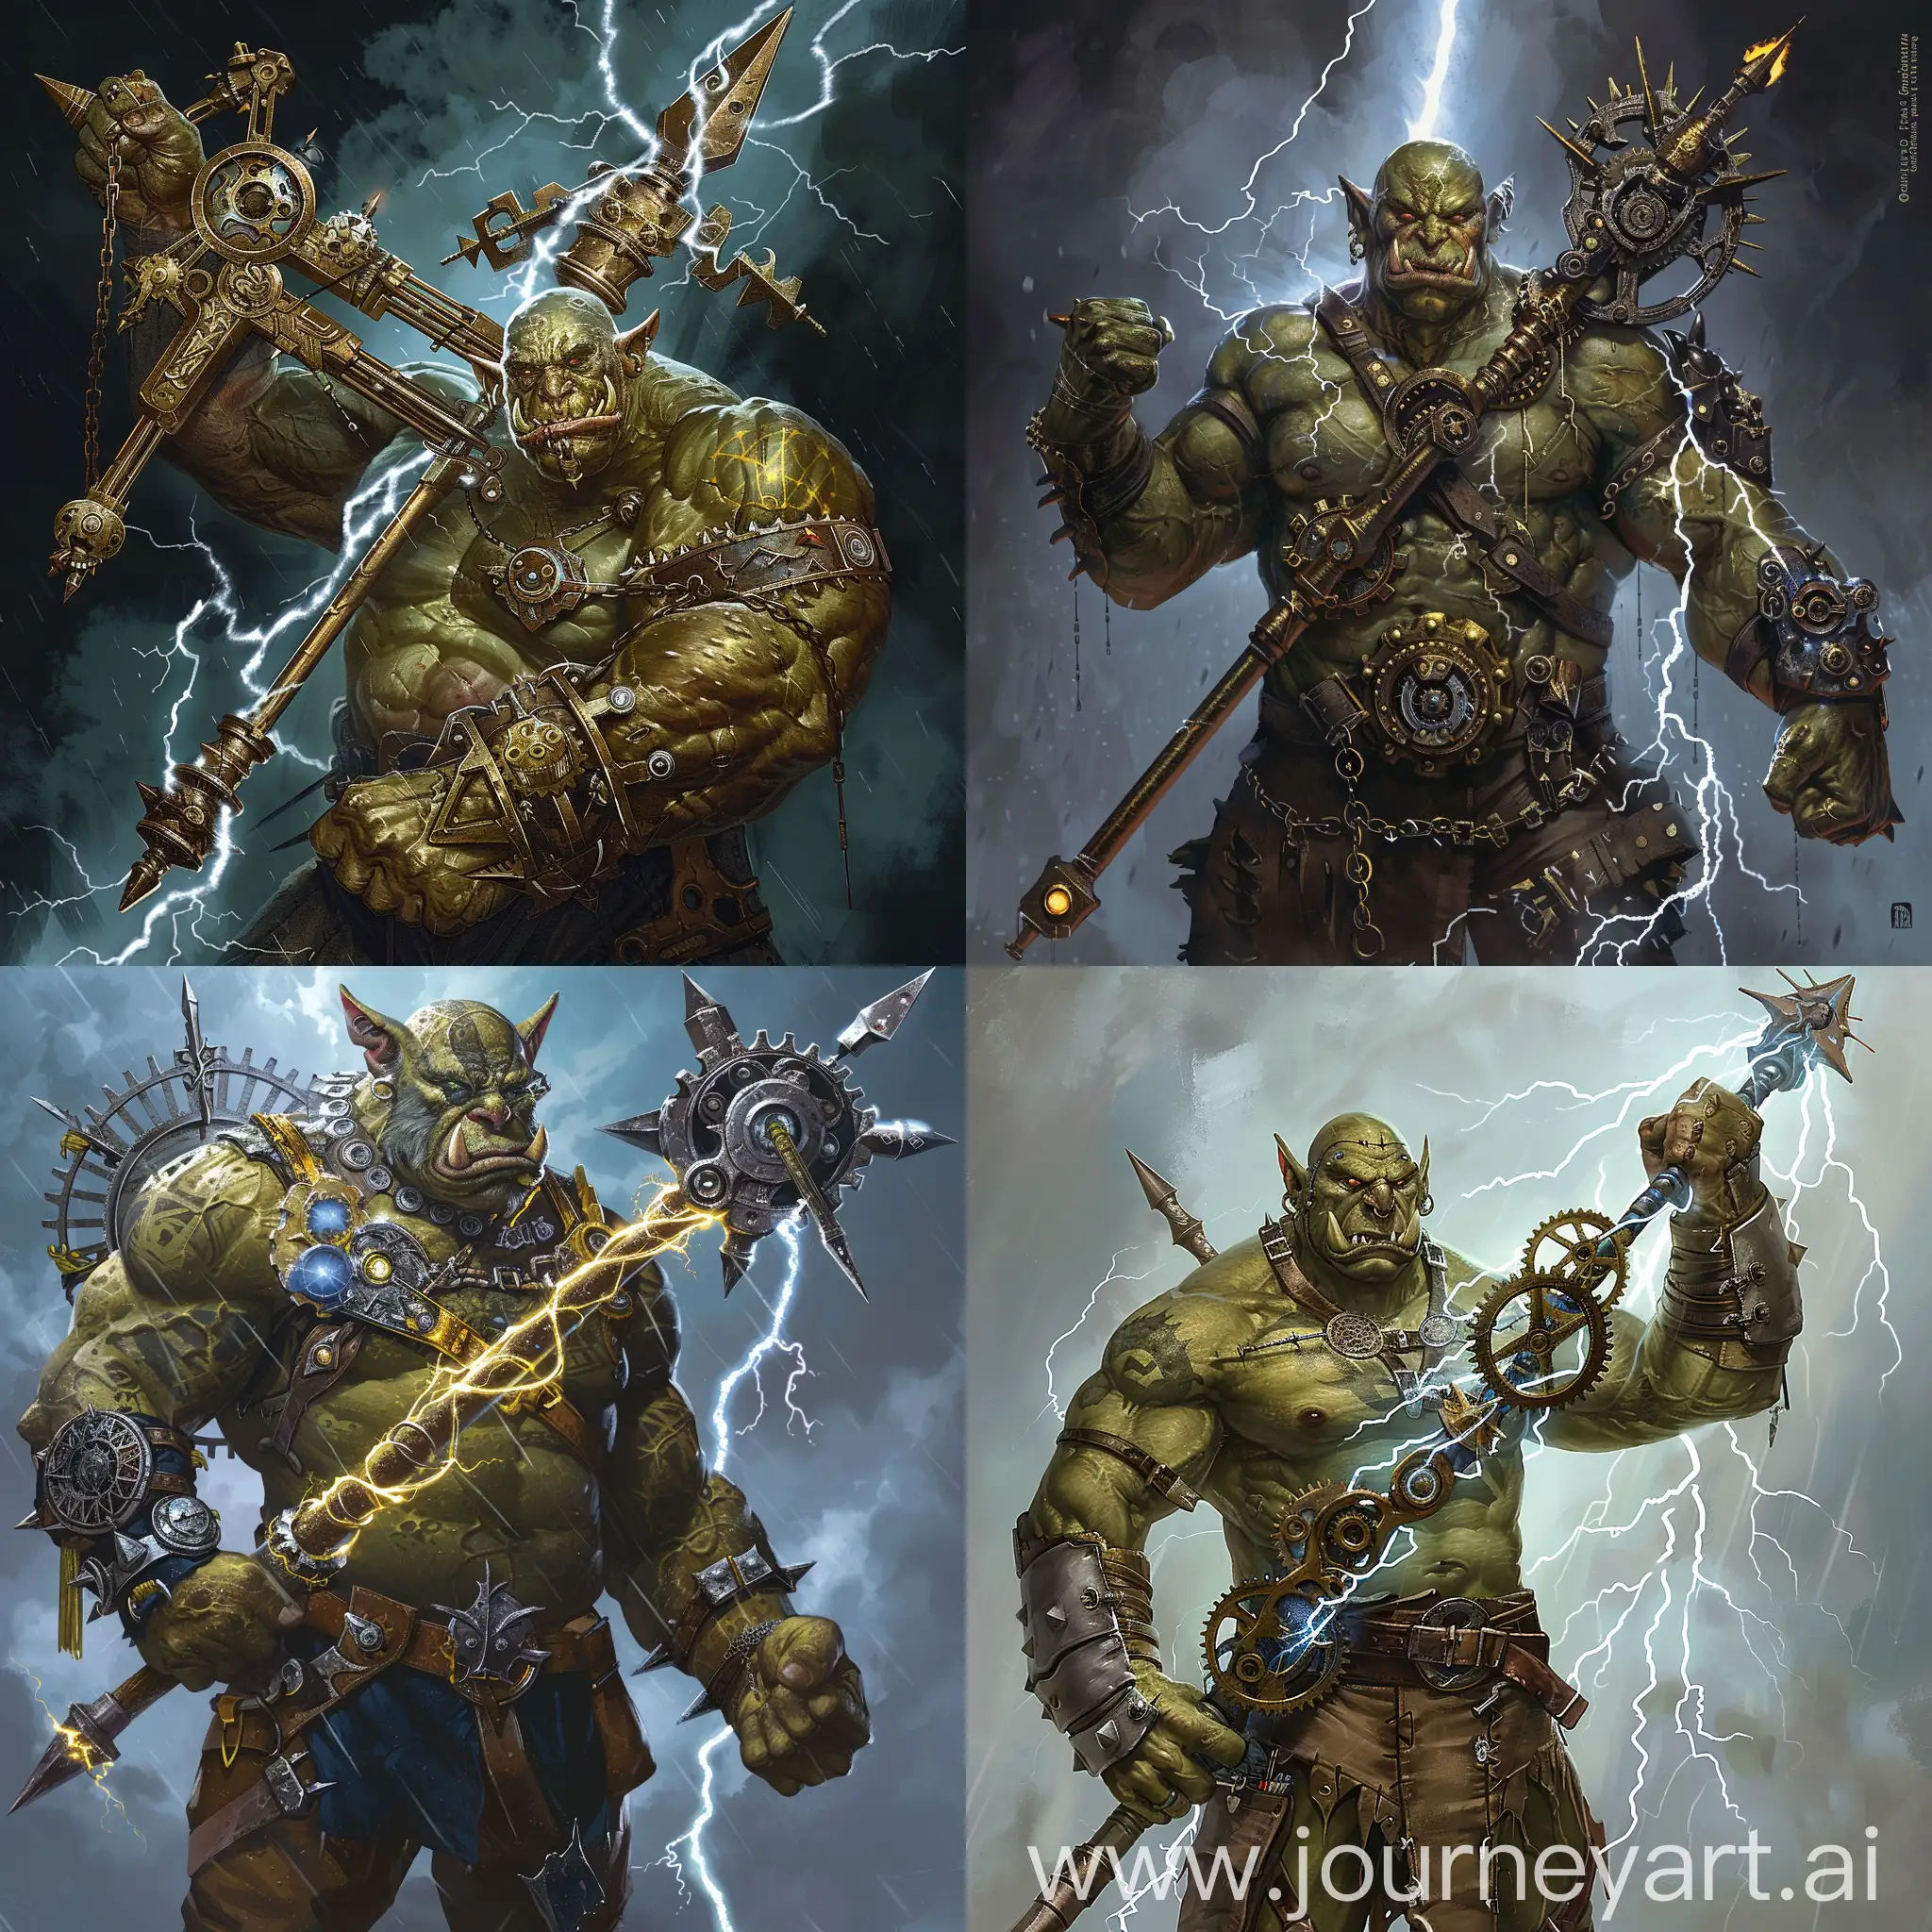 Generate an image of a fantasy inventor Orc warrior with a giant spear made of cogs with lightning. This orc named Grenwald should be flexing his muscles and have an occult background.